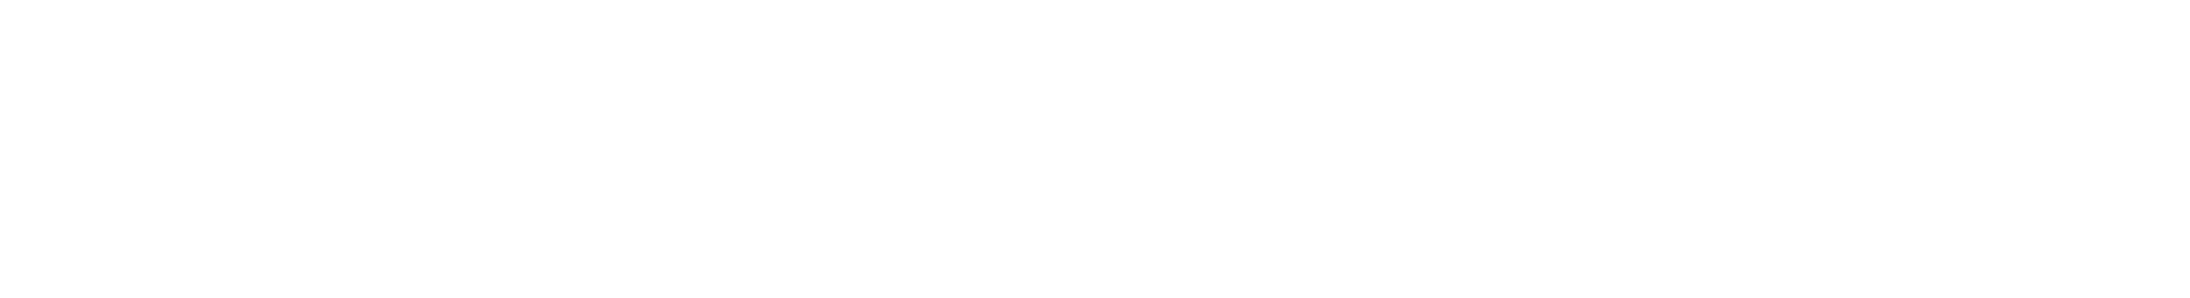 Universal Health Realty Income Trust Logo